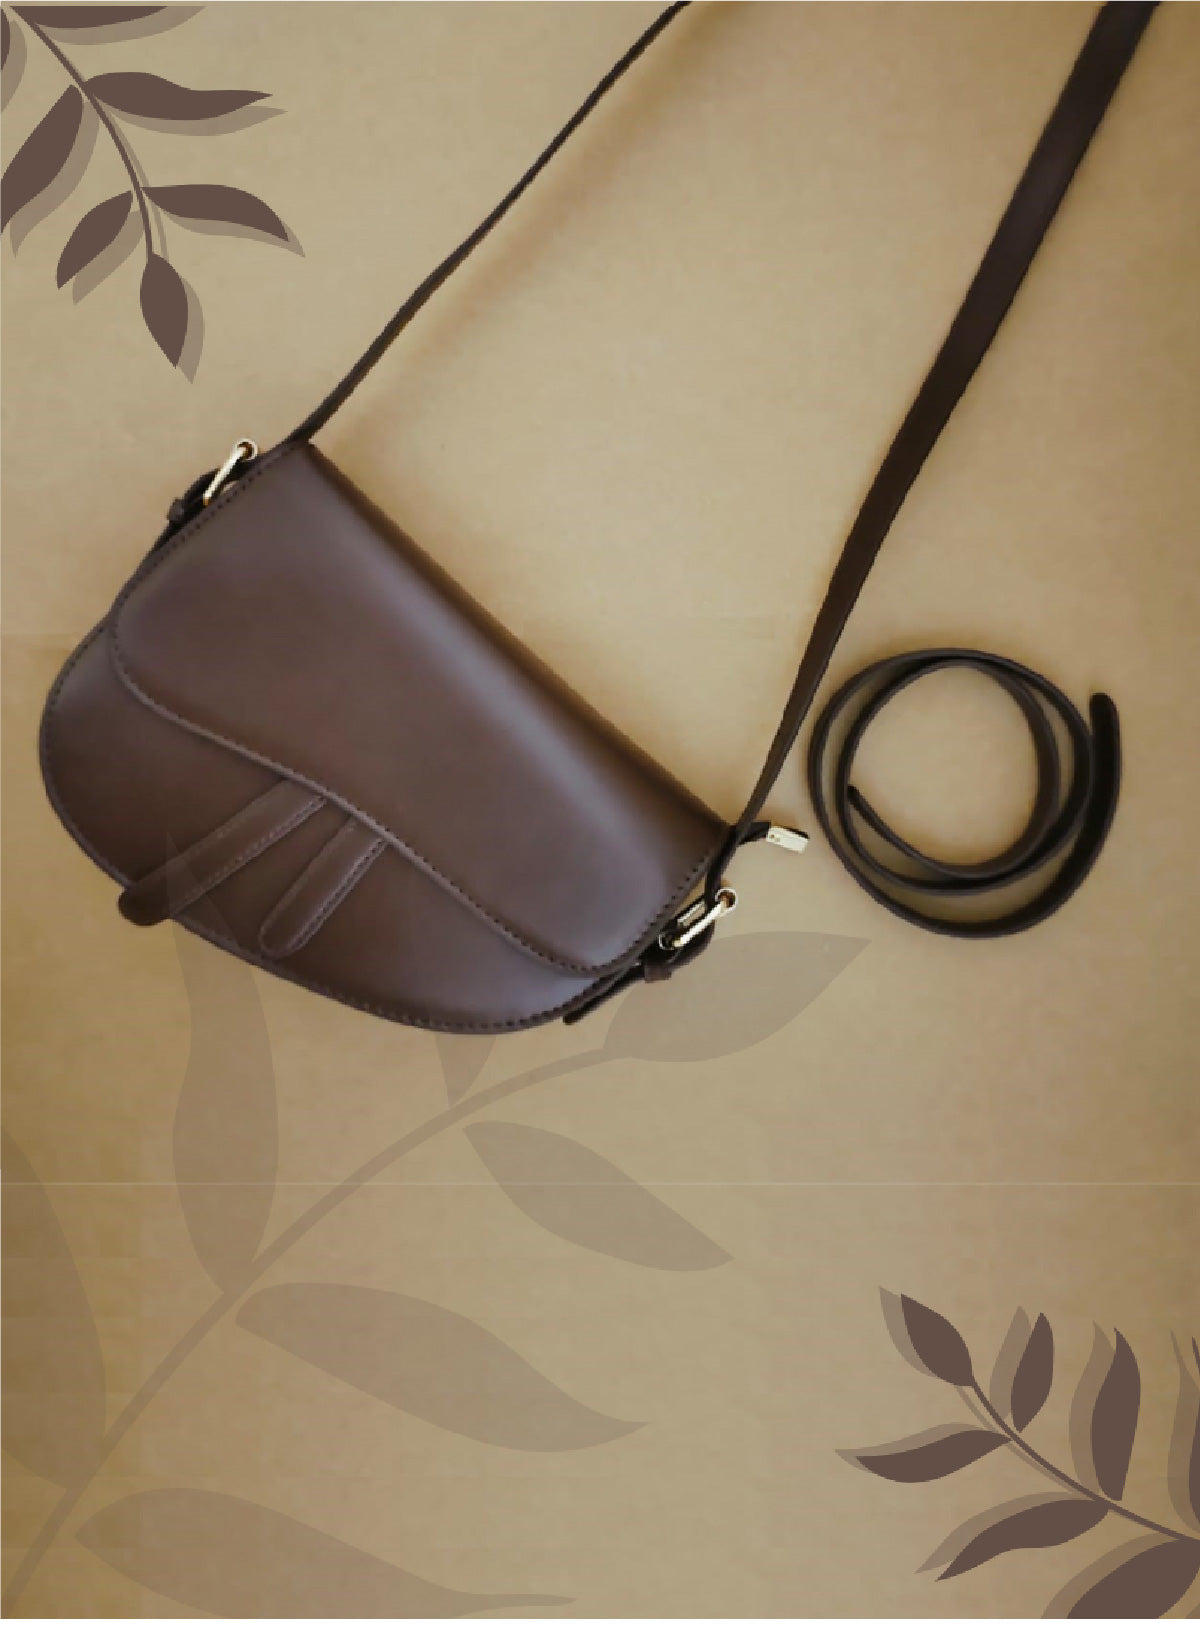 Classic leather handbag in a warm brown hue, reflecting the enduring charm of artisanal craftsmanship and modern style